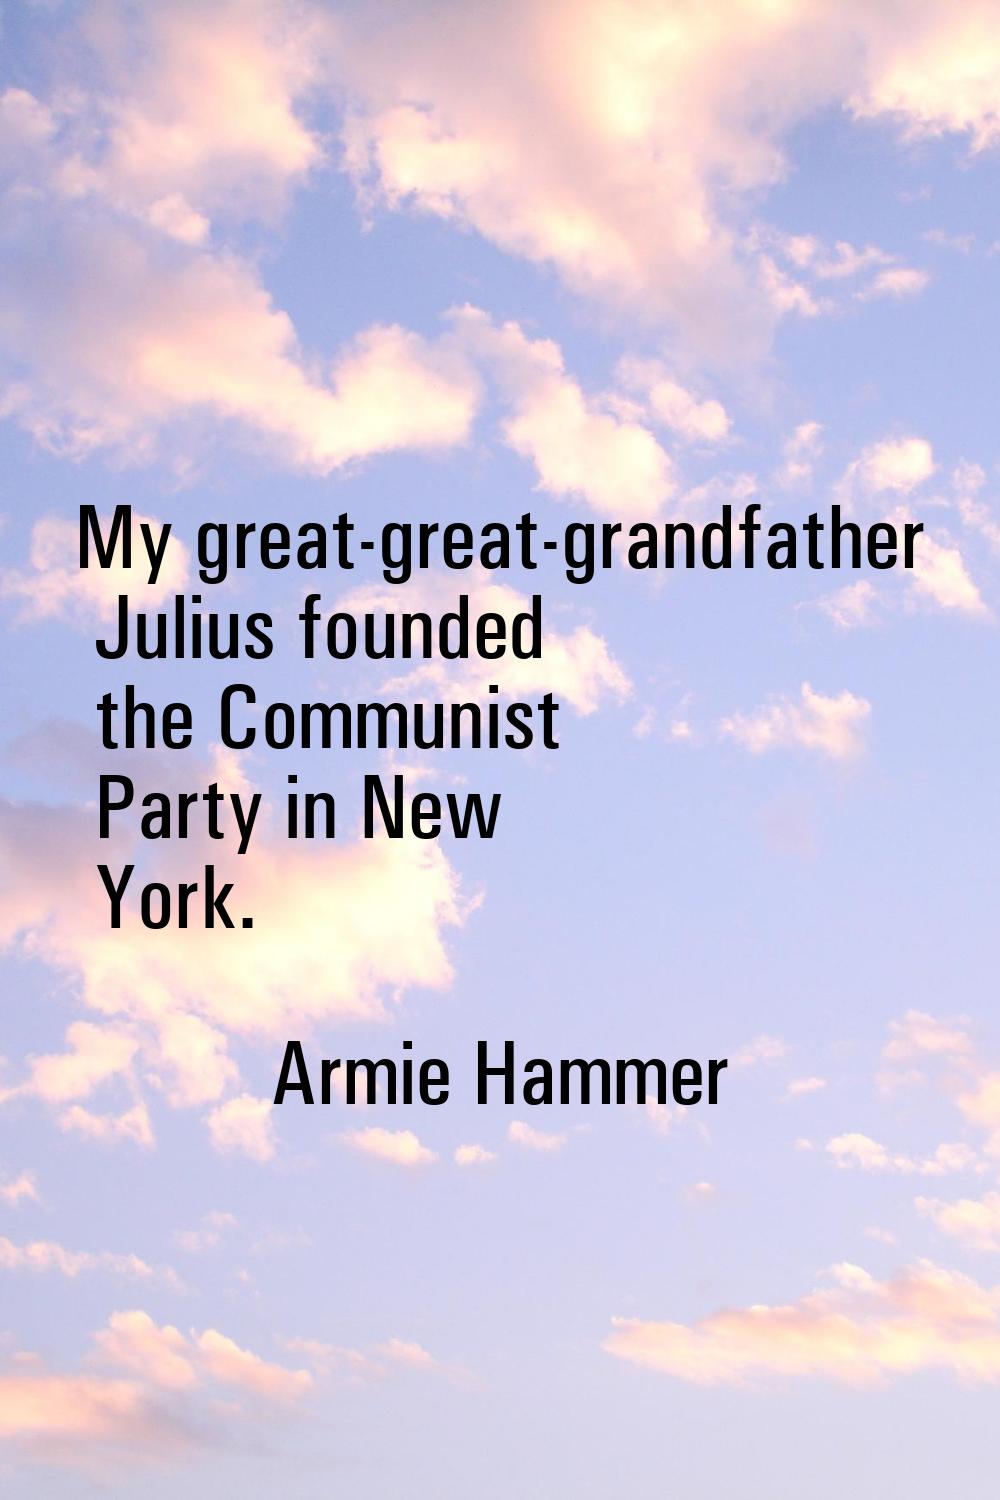 My great-great-grandfather Julius founded the Communist Party in New York.